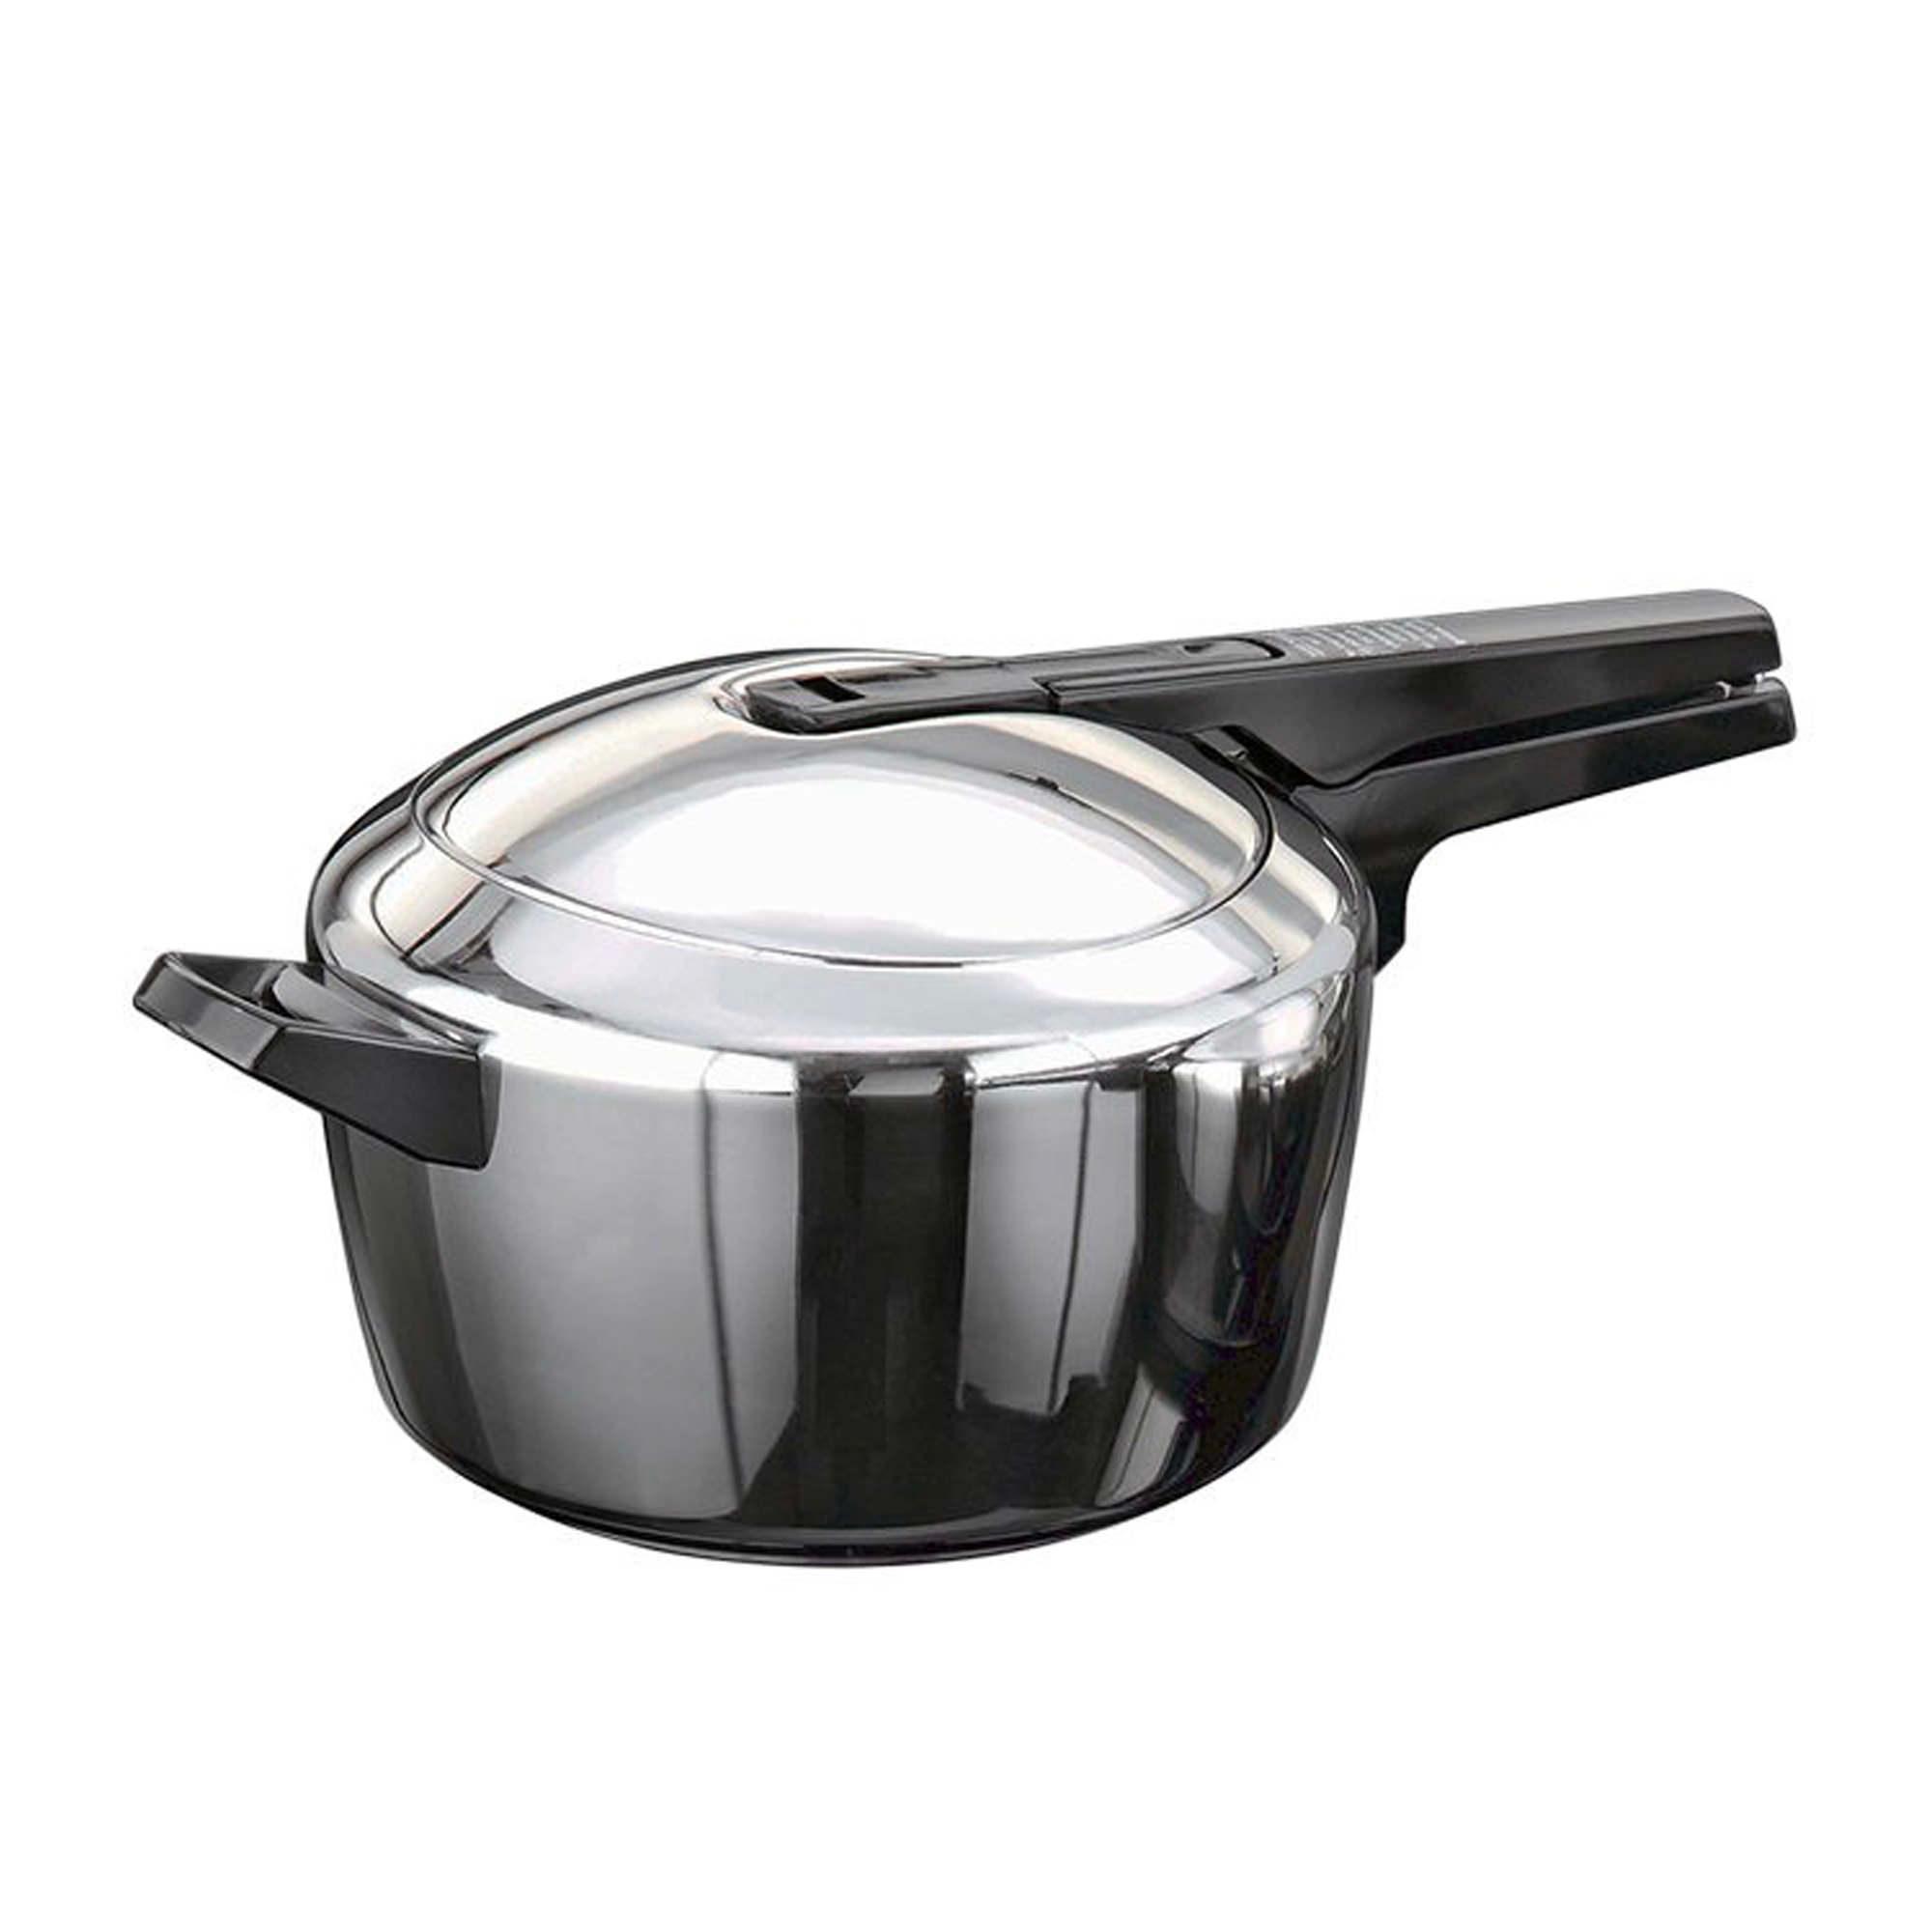 Futura Stainless Steel Pressure Cooker 5.5L Image 1